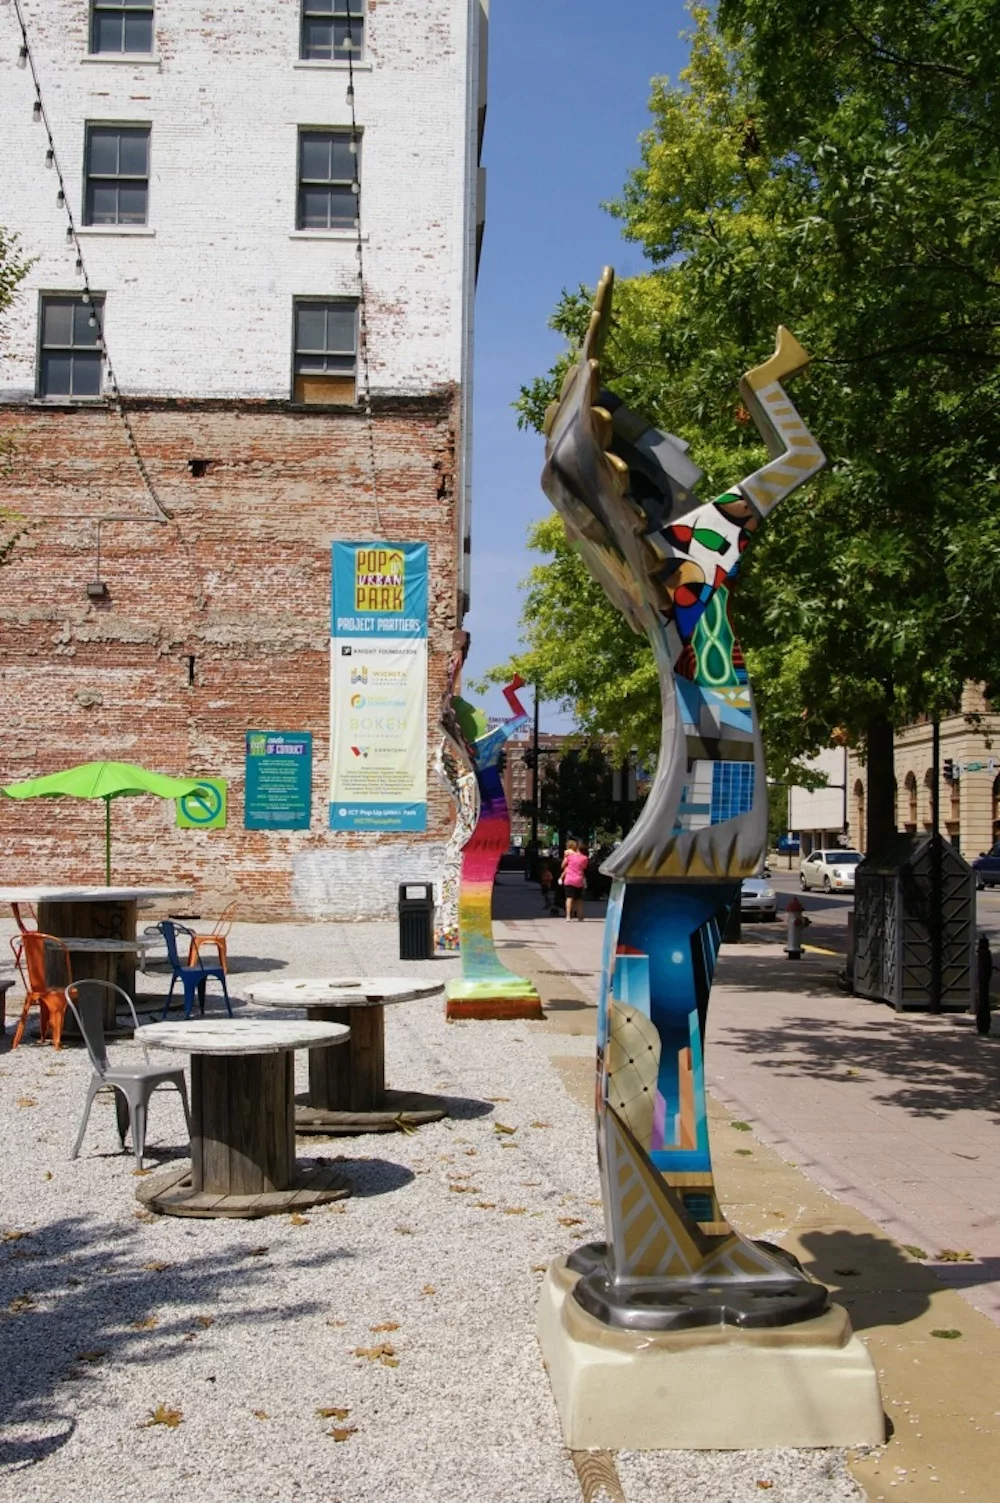 Decorated Keeper of the Plains statue at the ICT Pop-Up Urban Park in downtown Wichita, Kansas